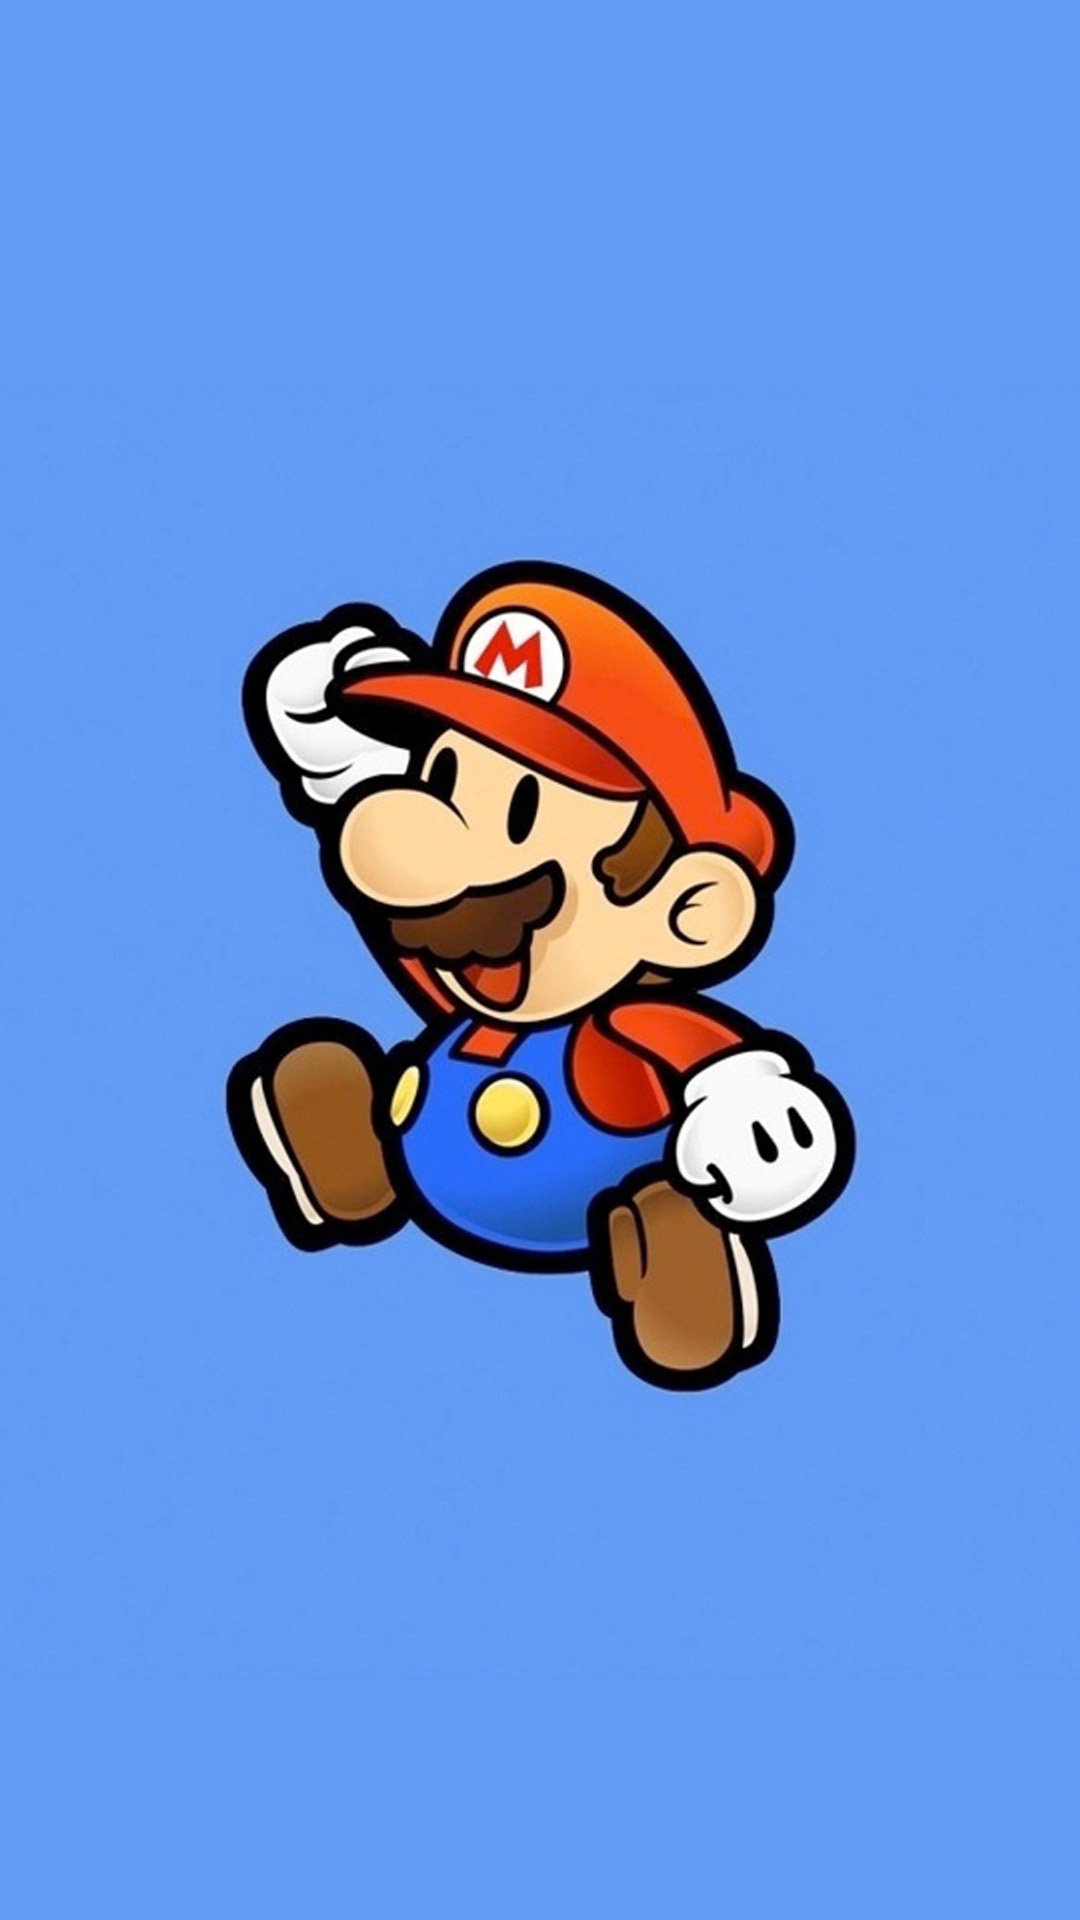 Super Mario wallpapers for iPhone